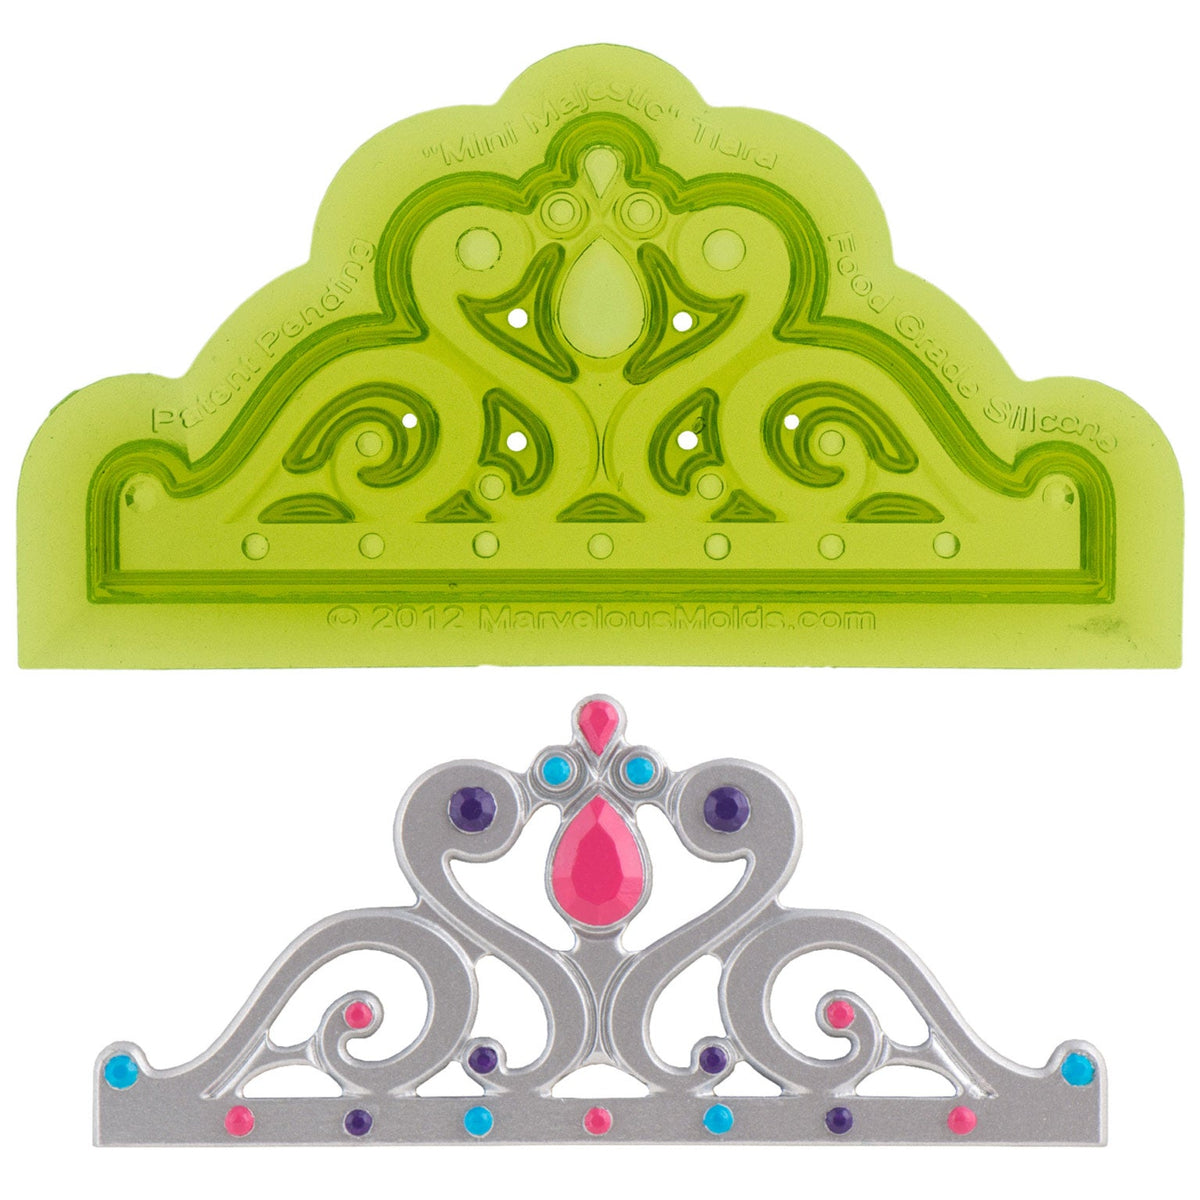 Mini Majestic Princess Tiara Food Safe Silicone Mold for Fondant Cake Decorating by Marvelous Molds